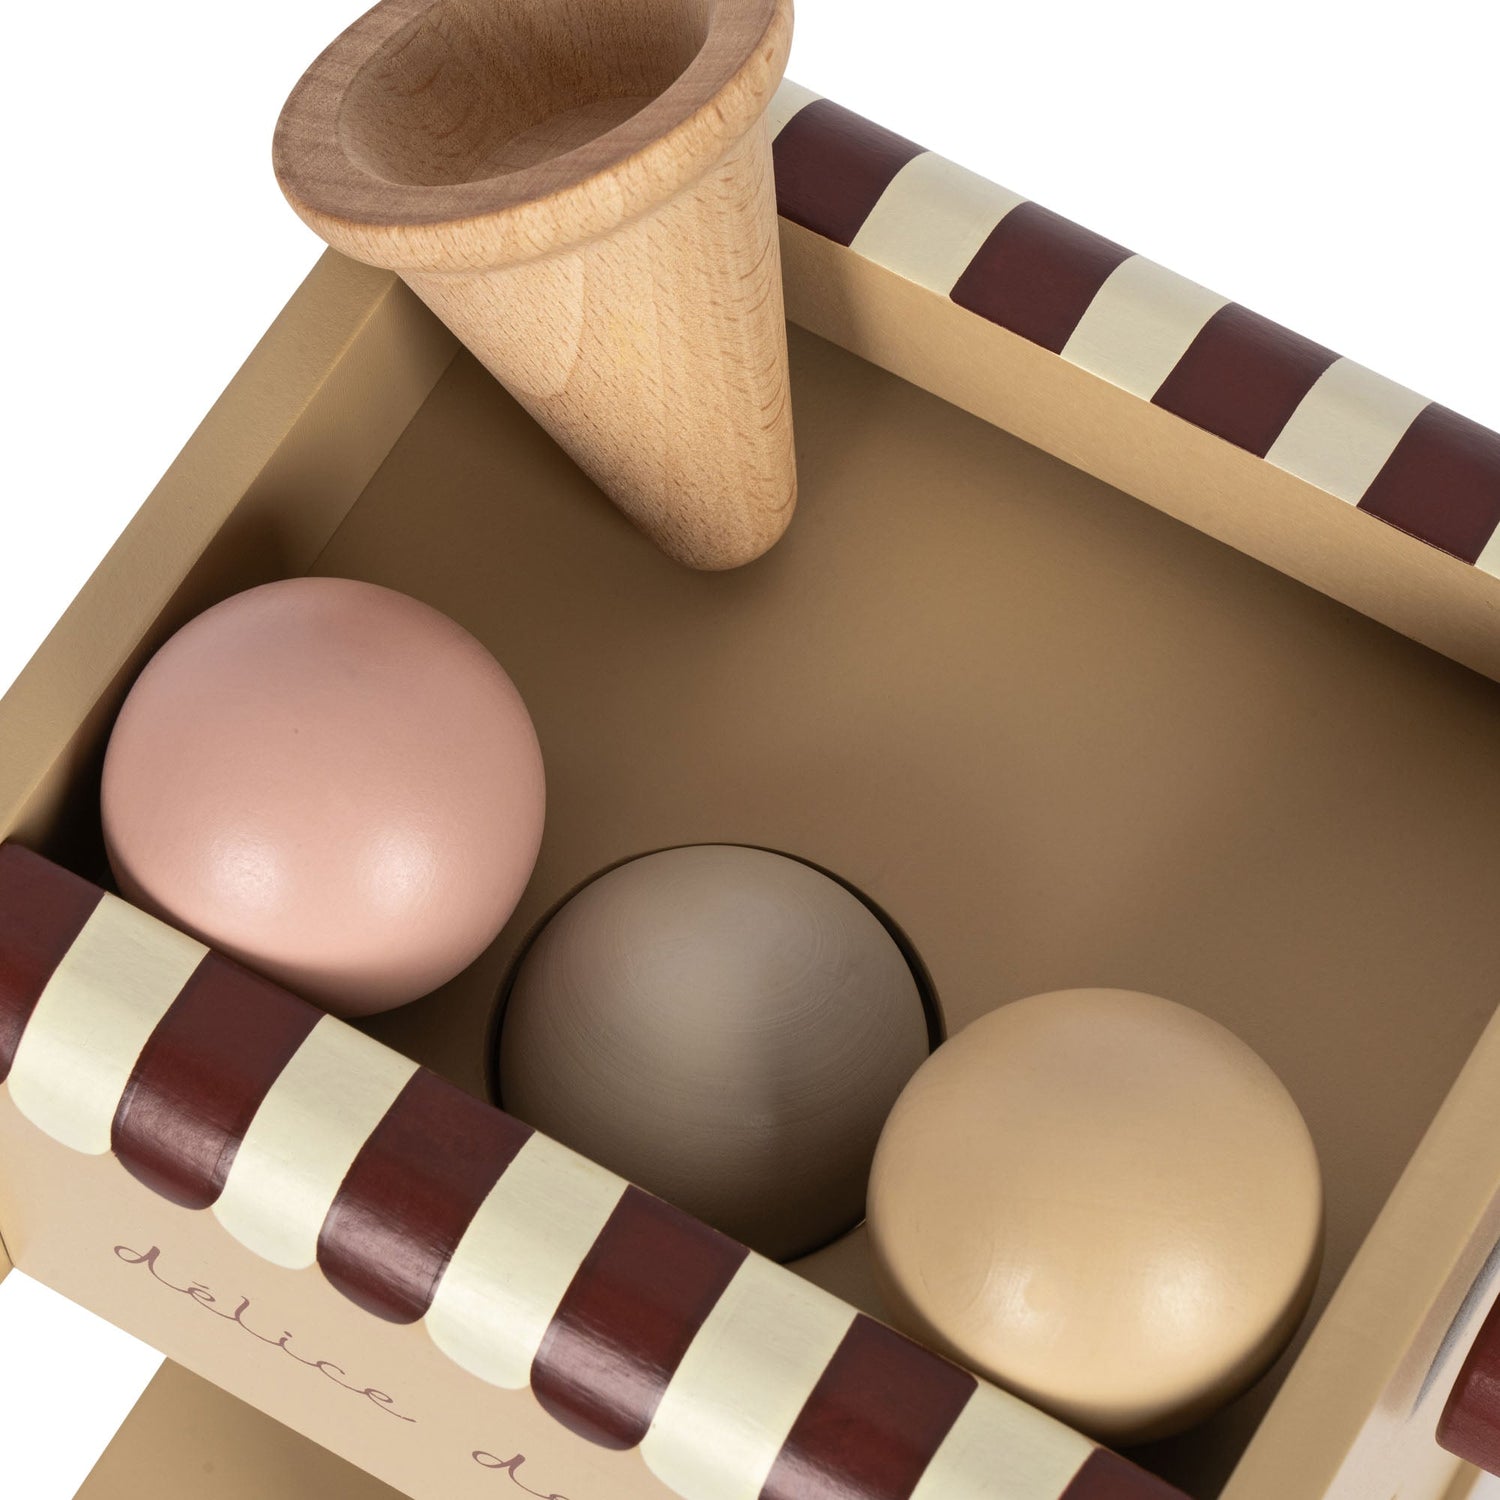 Konges Sløjd Wooden Toy Ice Cream Maker (Small Aesthetic Defects/Damages)